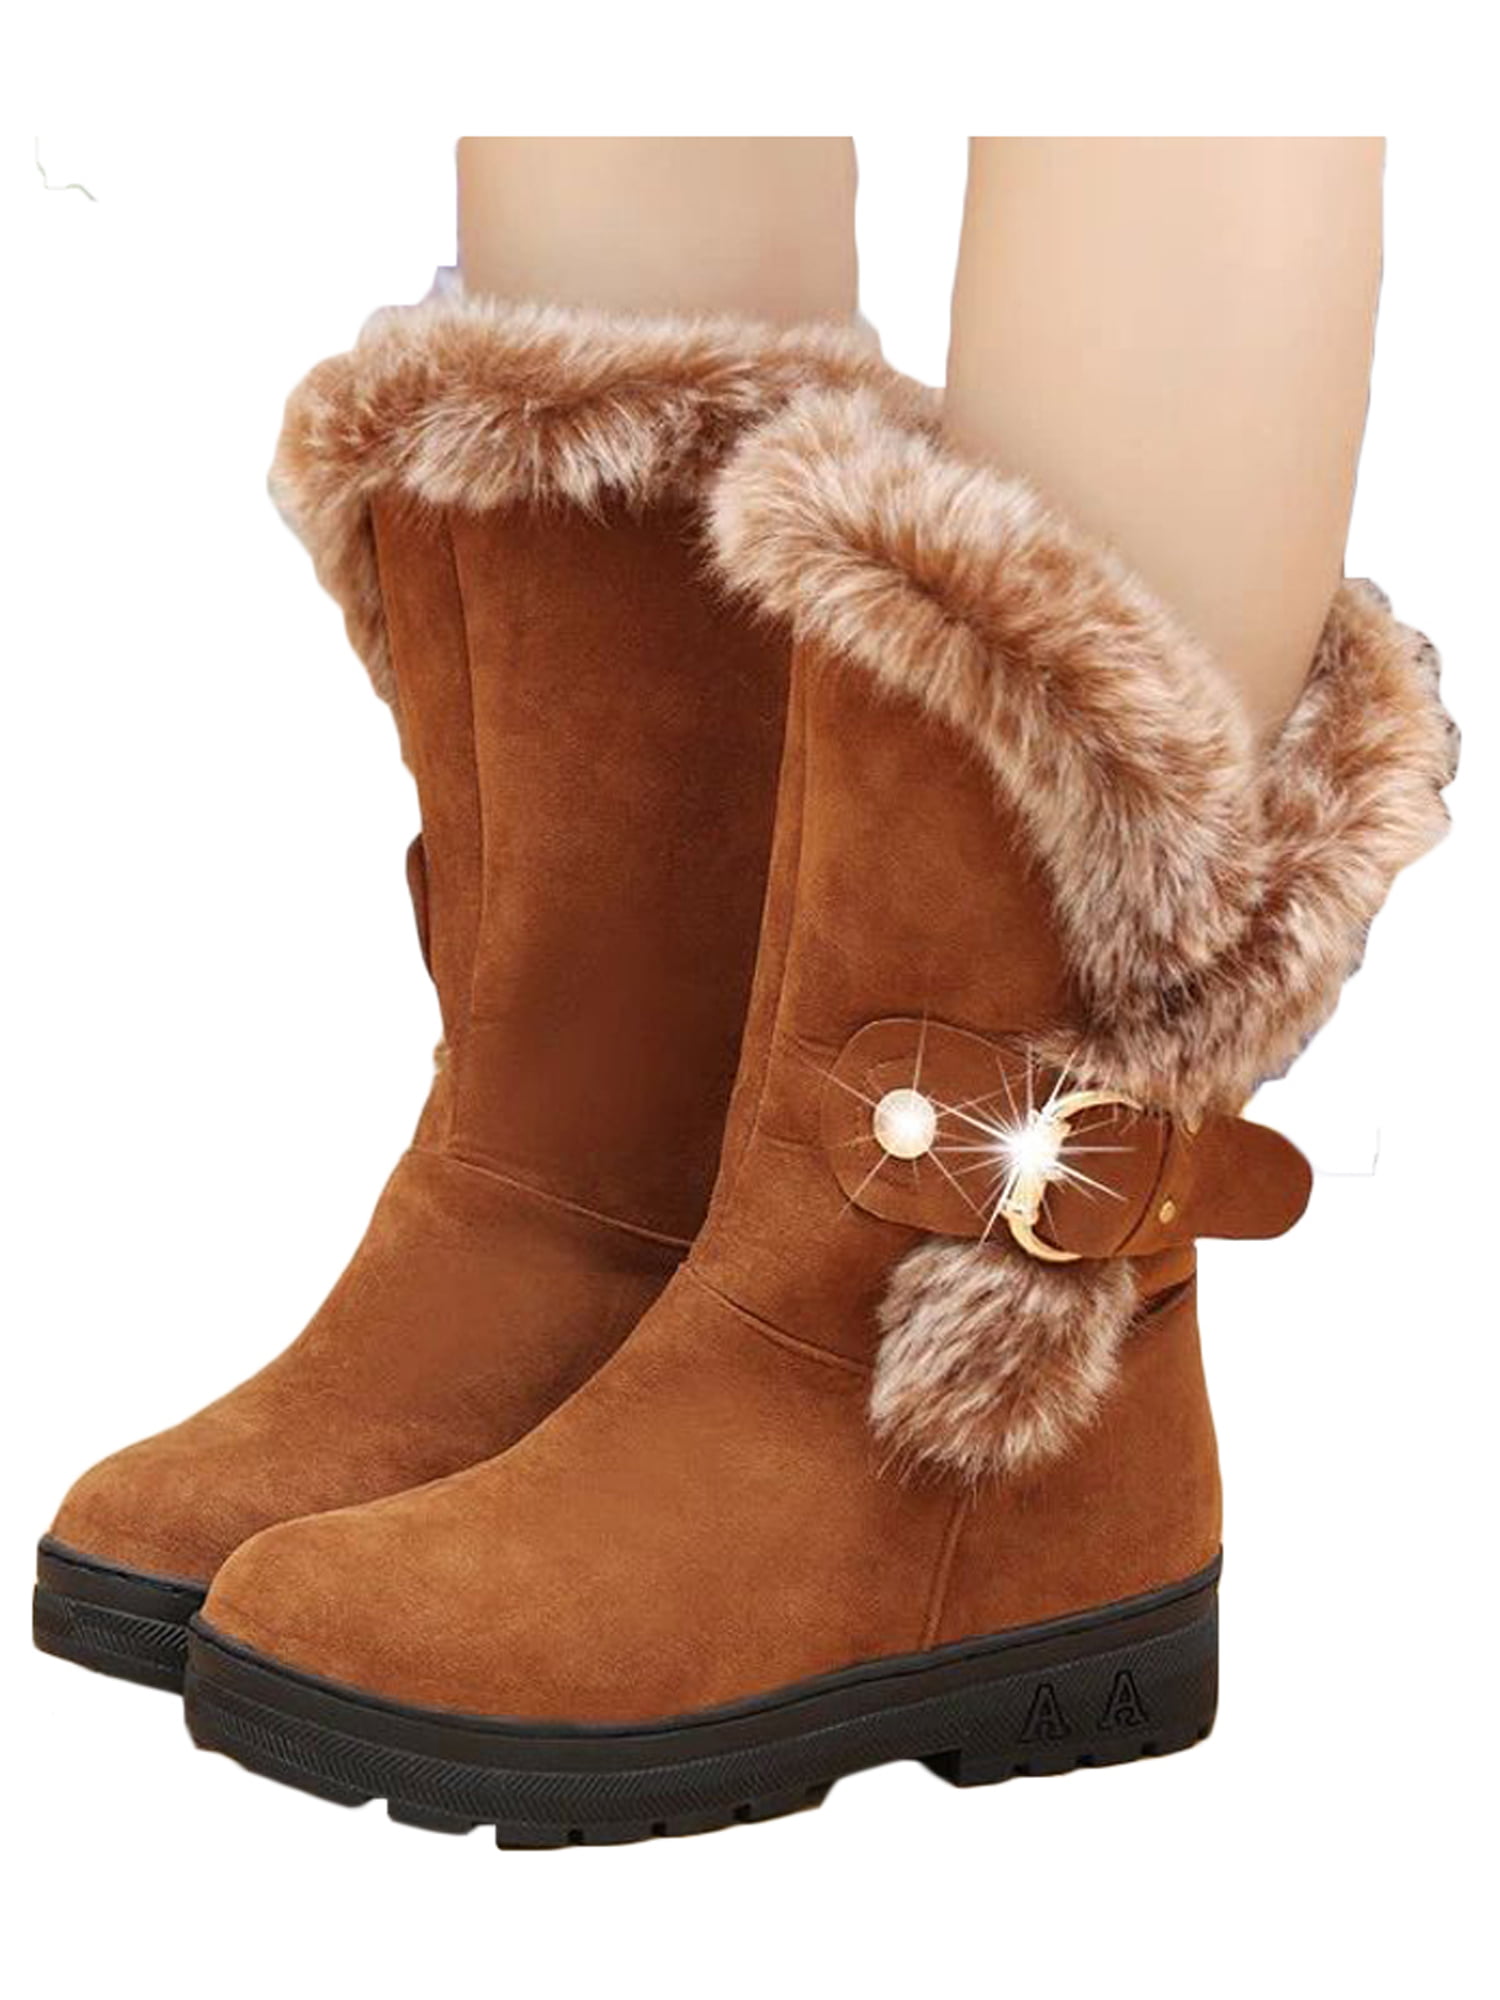 Women faux Suede Fur Trim Round Toe Mid Calf Winter Warm Boots Casual Shoes new 